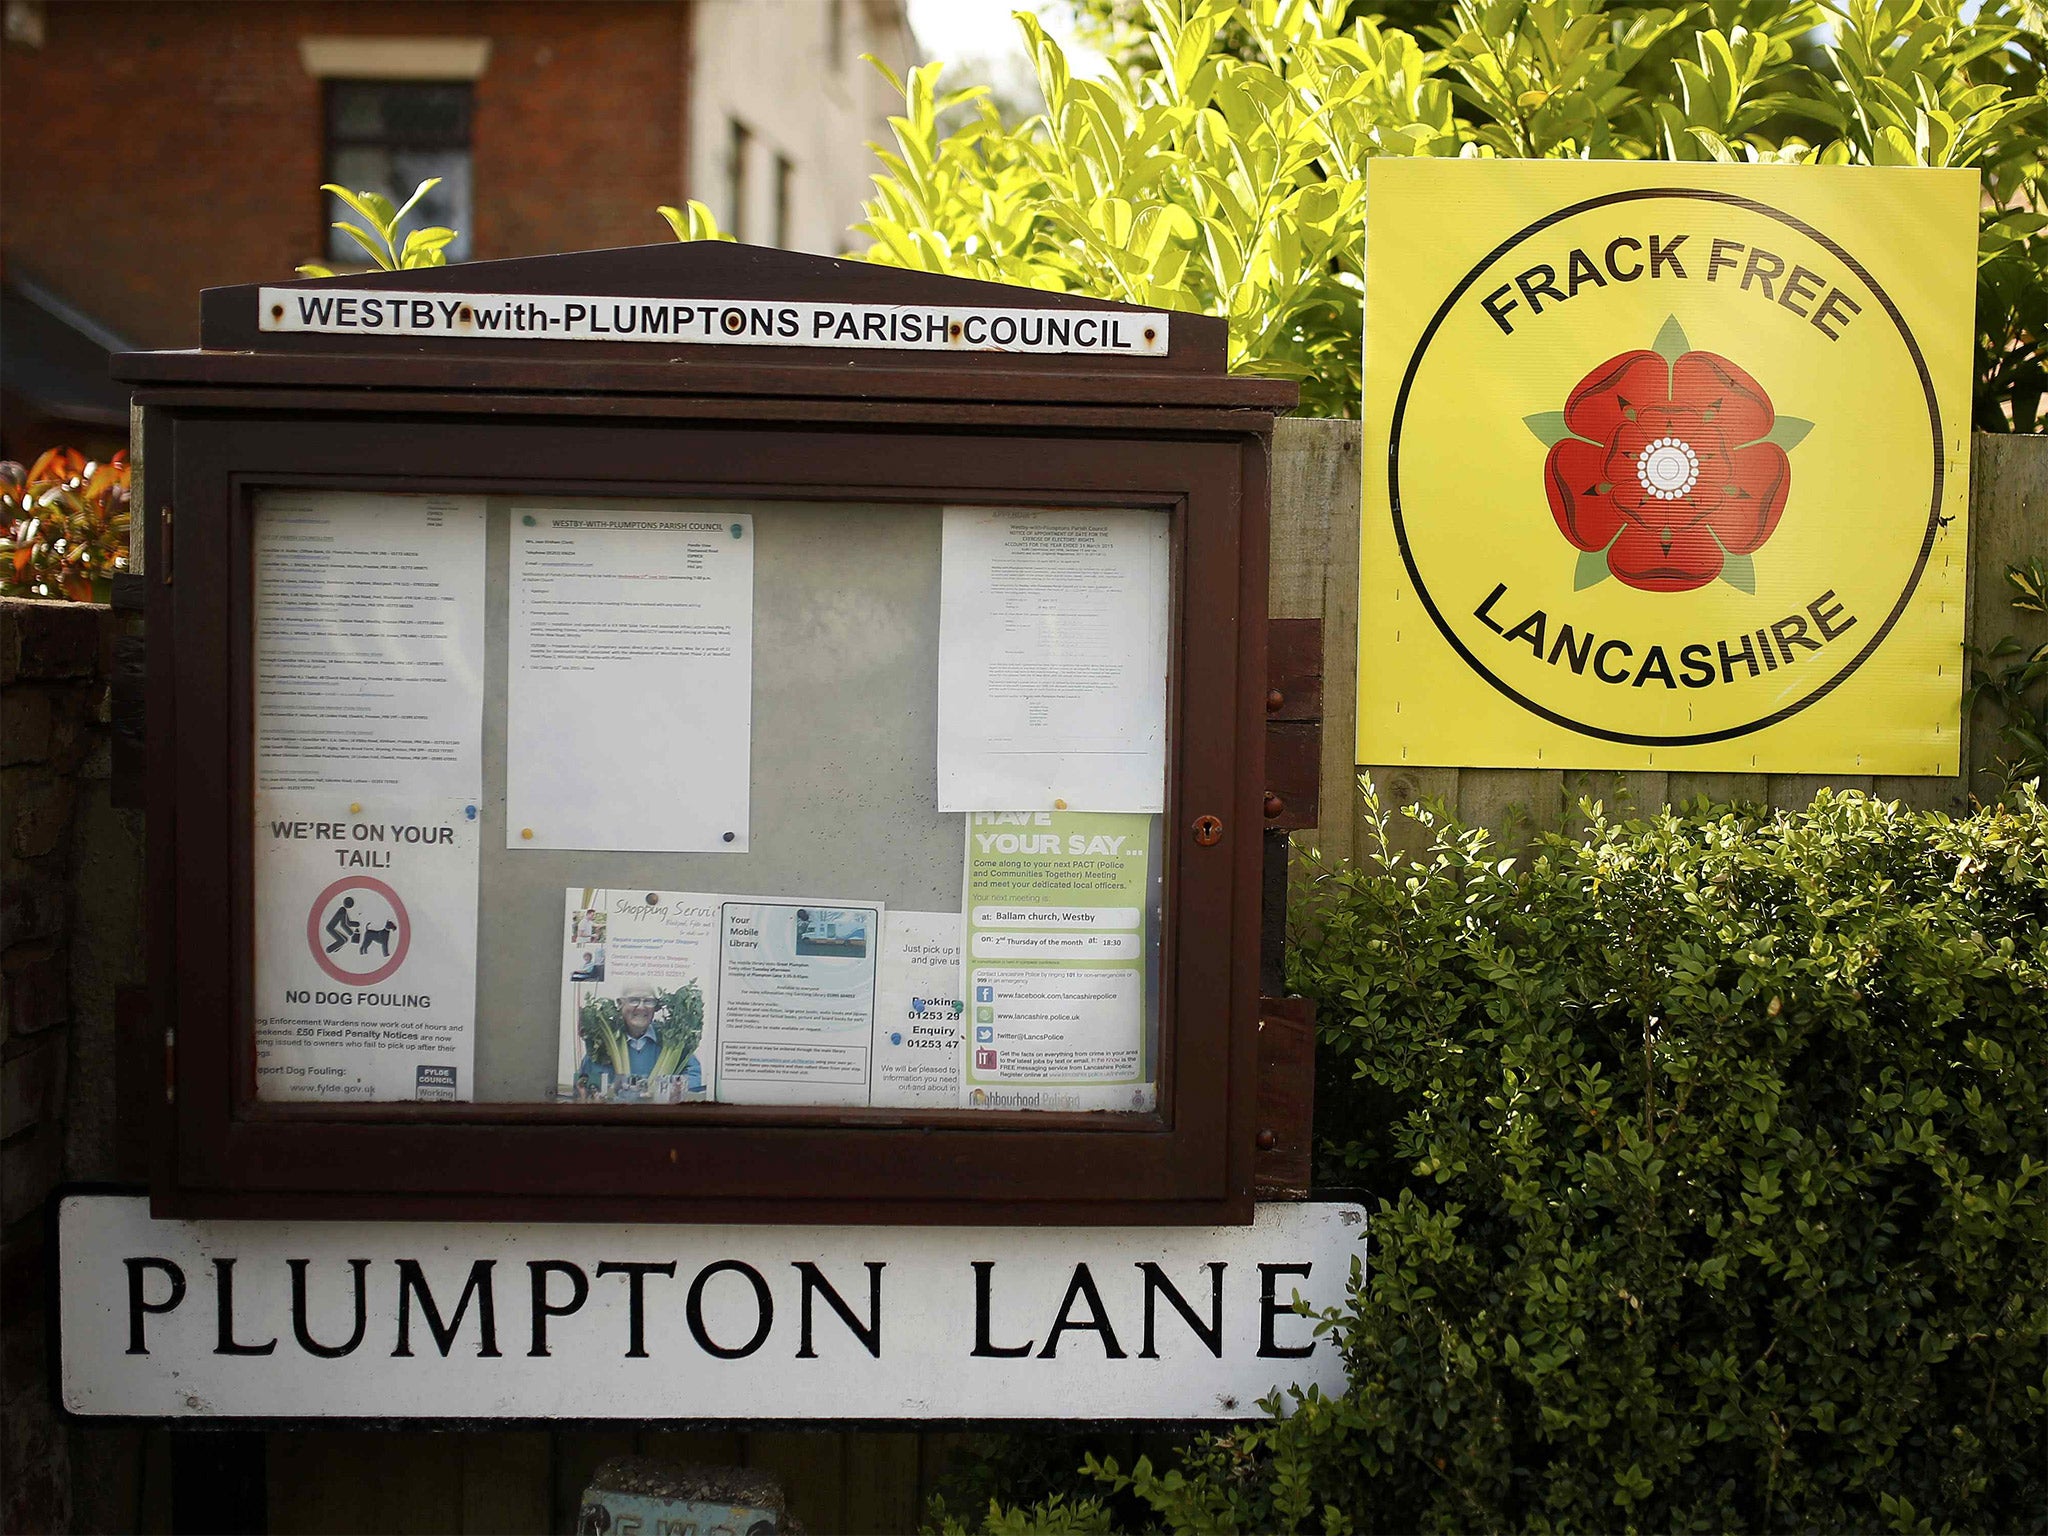 An anti-fracking sign in the village of Little Plumpton in Lancashire